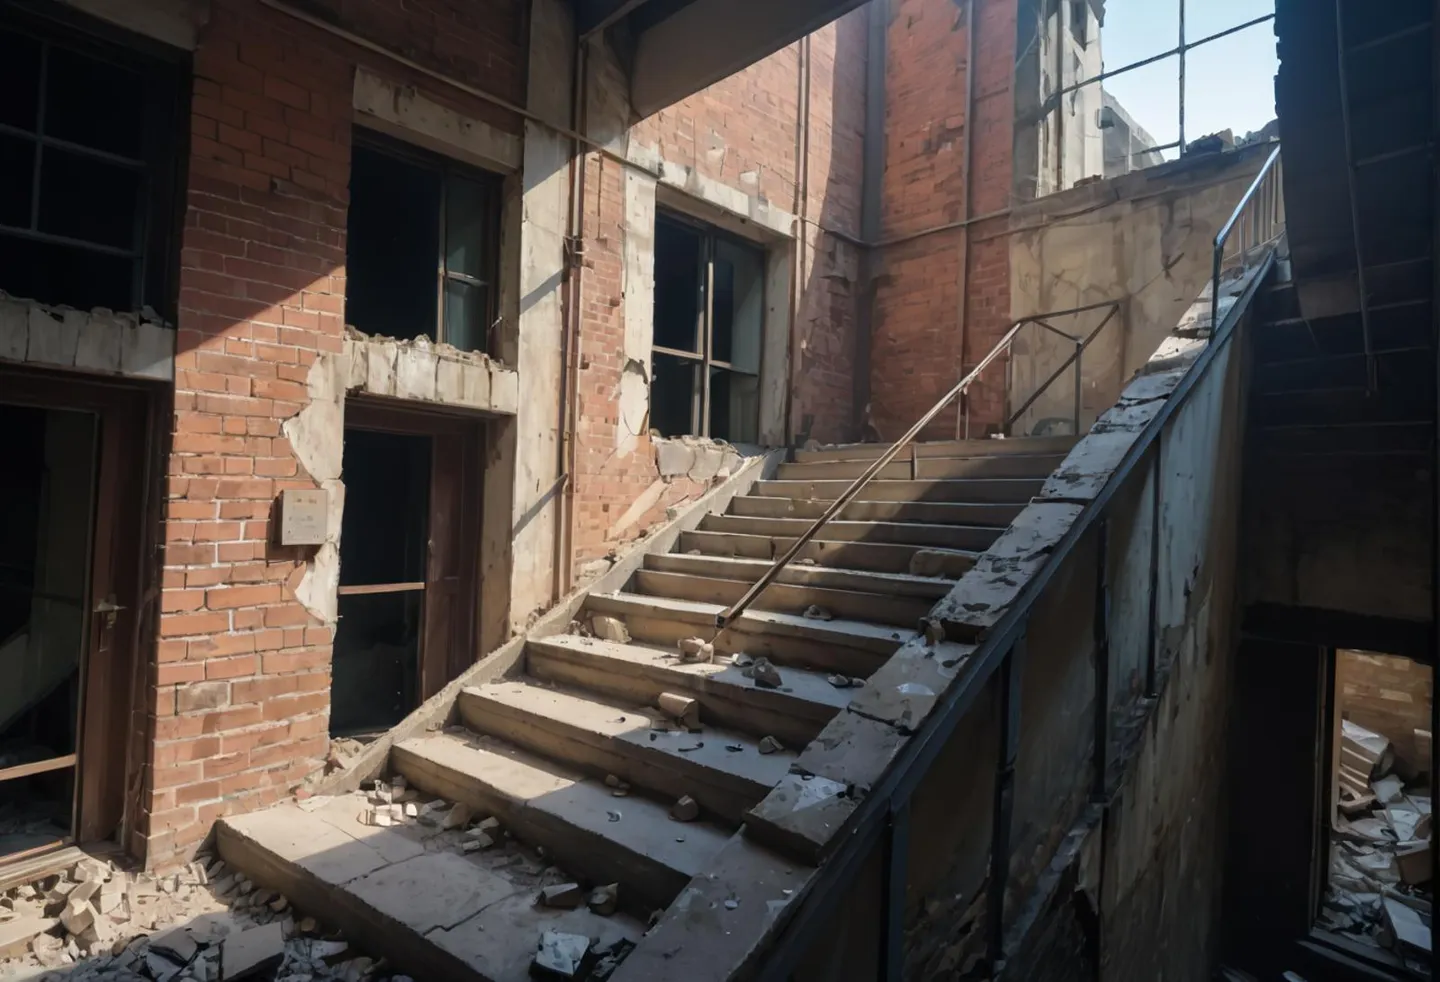 An AI generated image using Stable Diffusion showing an abandoned building with a deteriorating staircase. The walls are made of red brick and partially covered with plaster, with broken windows and debris scattered on the stairs.